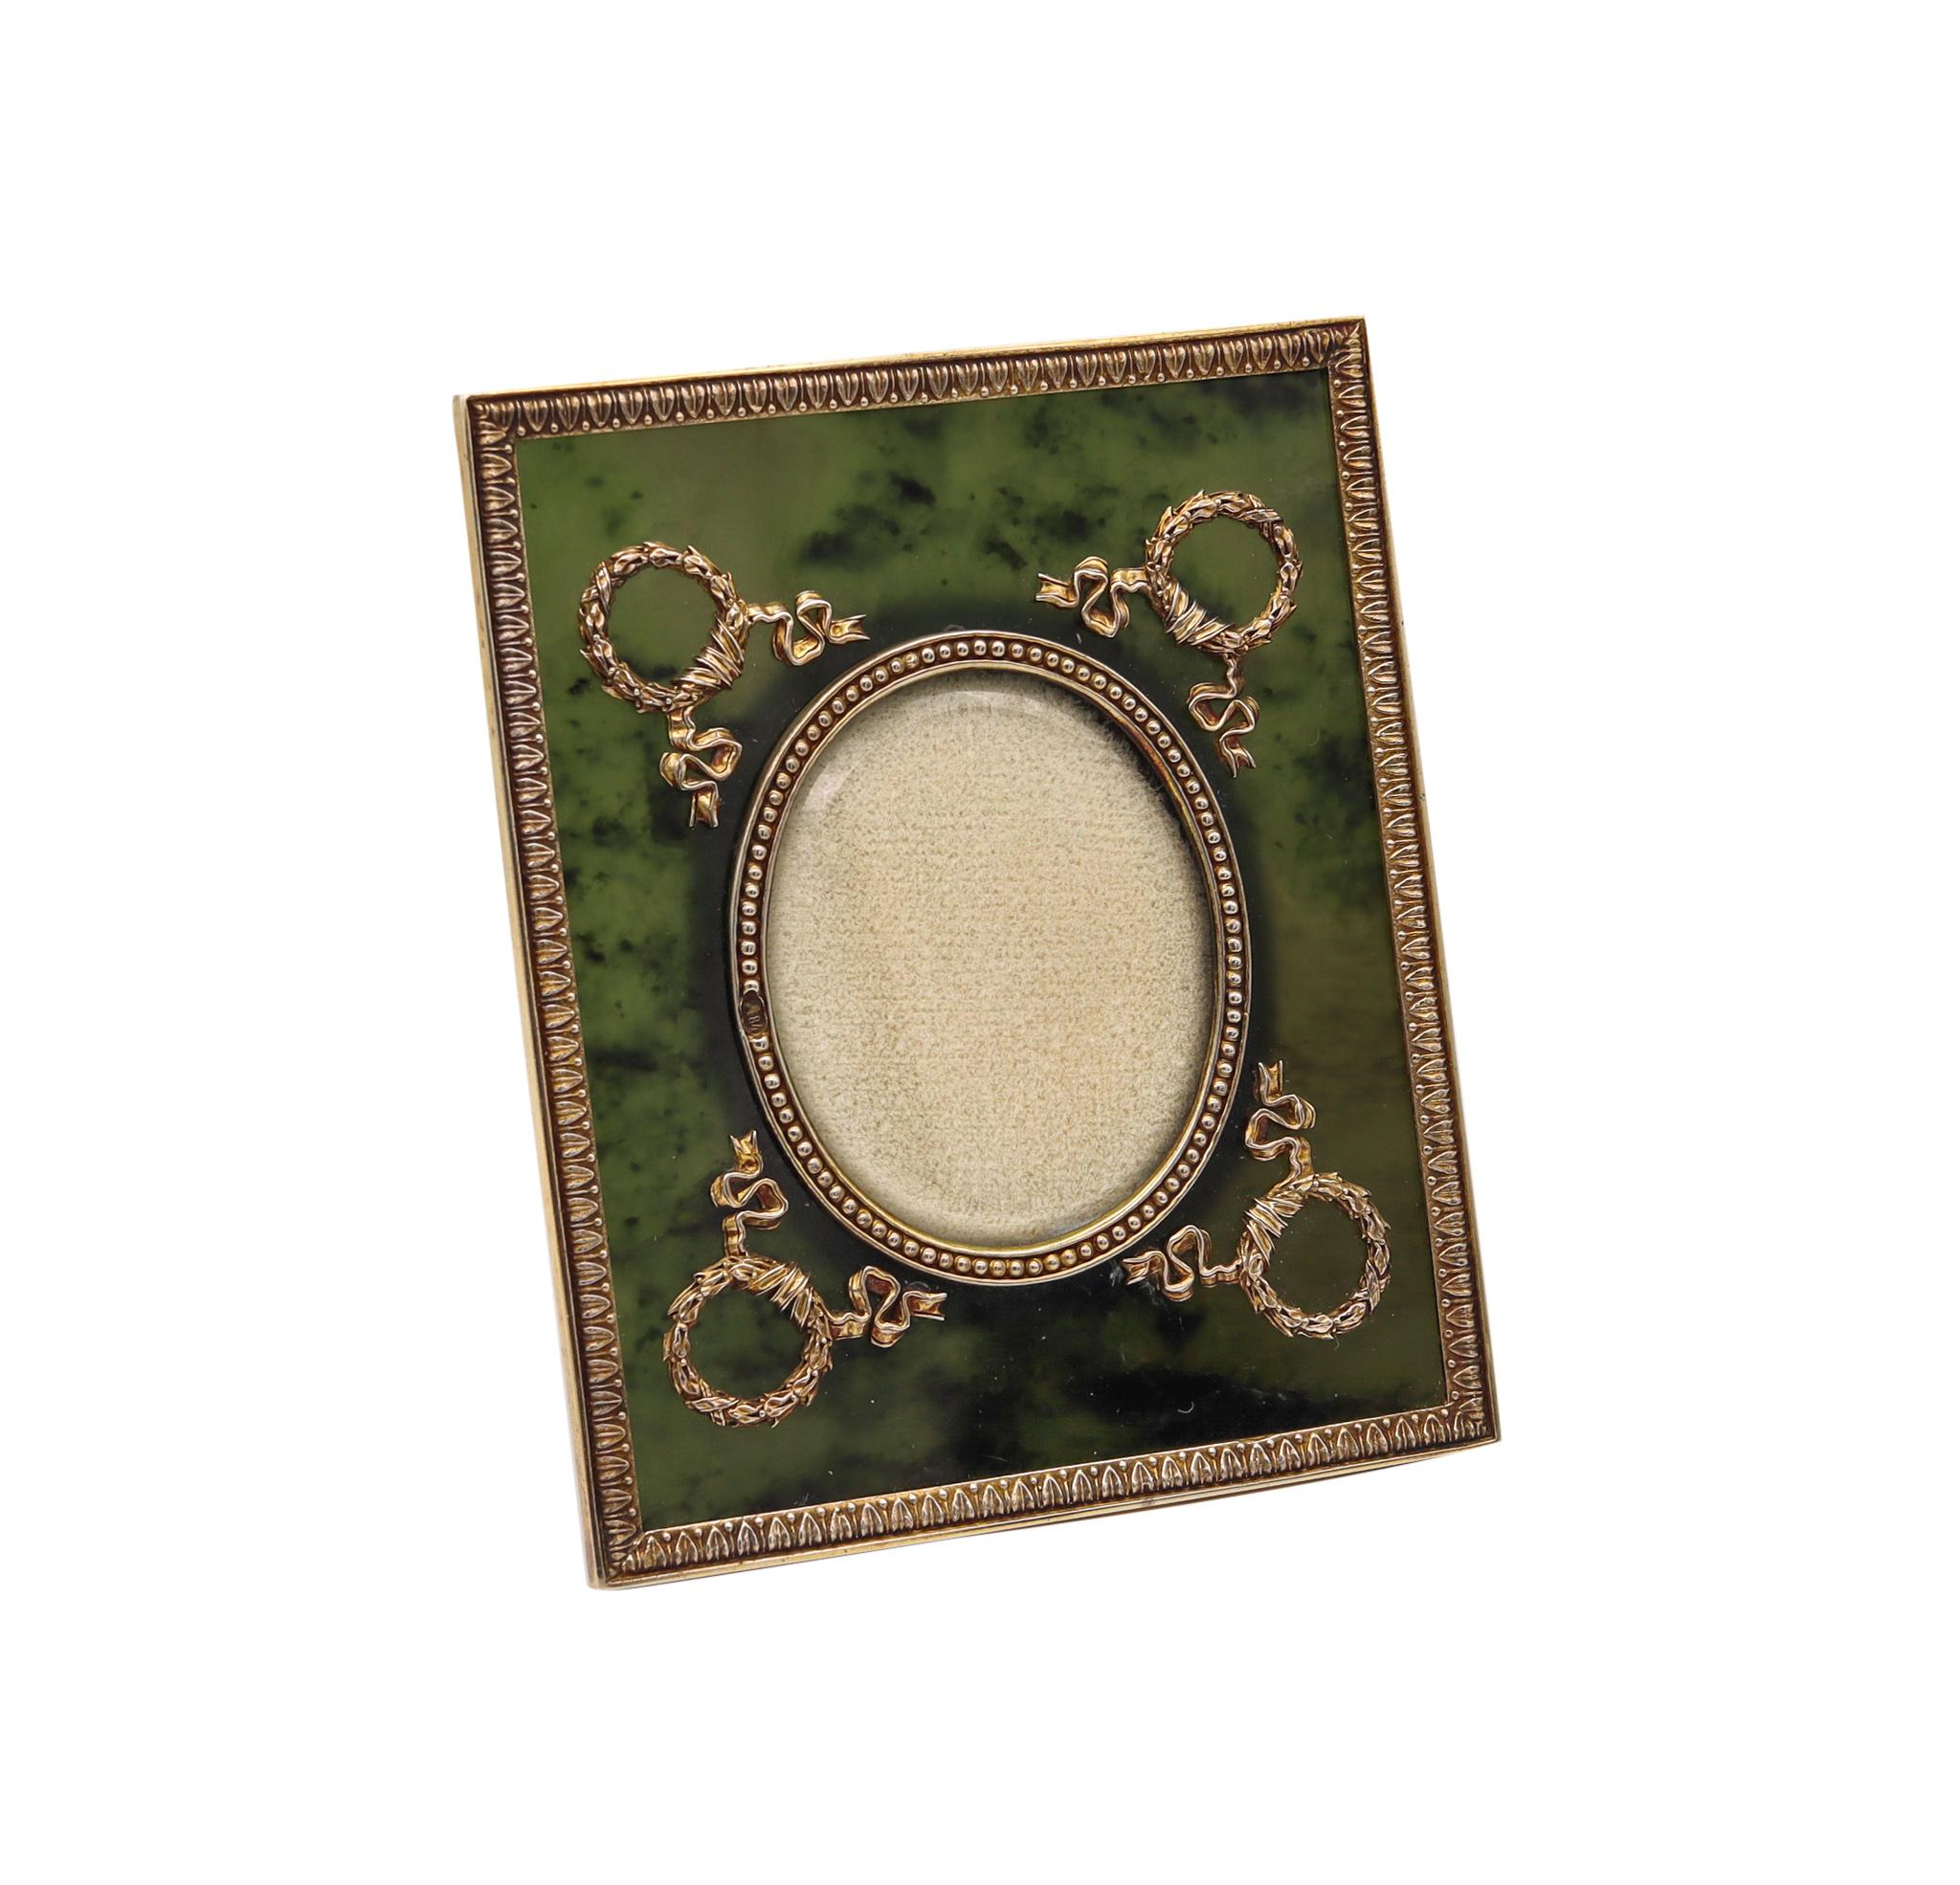 Neoclassical Russian 1915 Moscow Nephrite Jade Desk Picture Frame Mounted in Gilded Silver For Sale